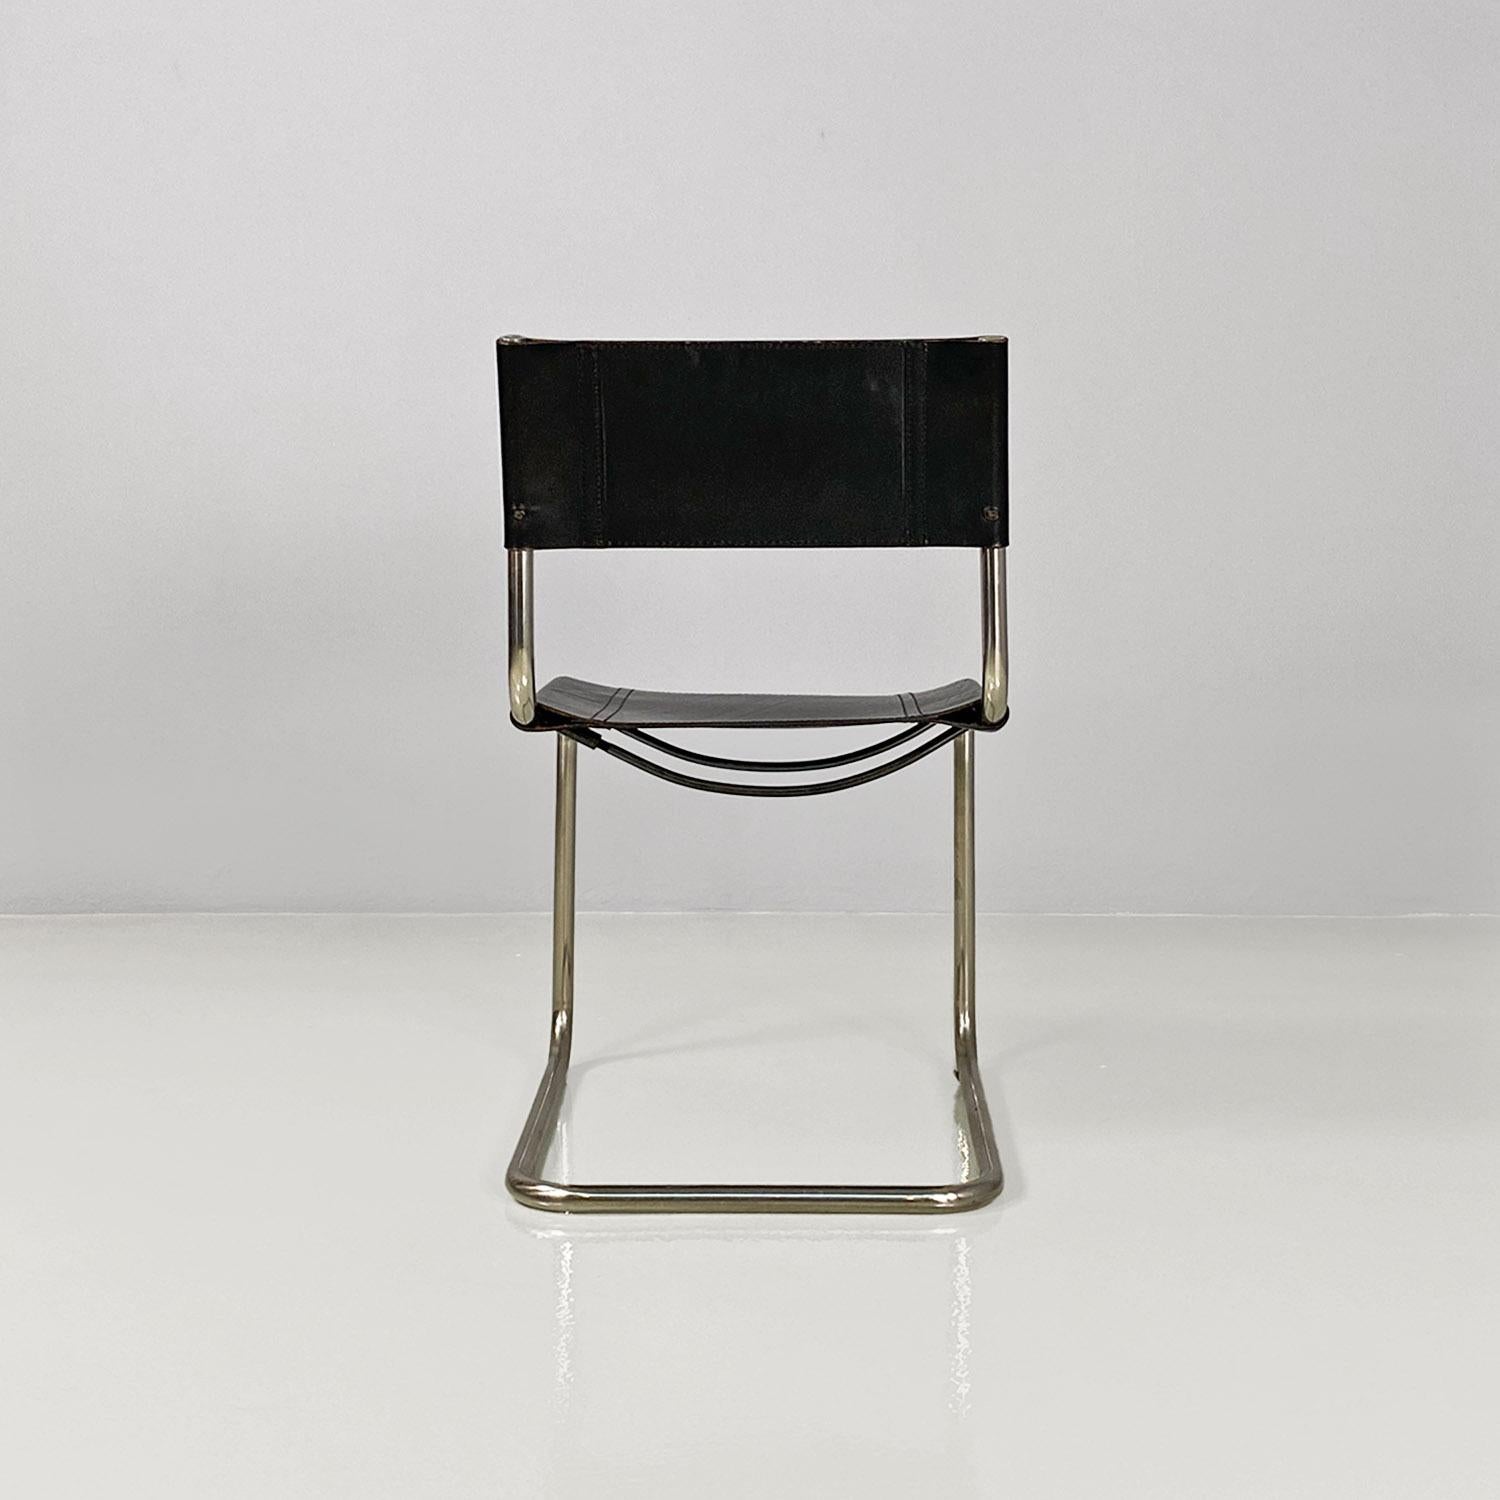 Italian modern black leather and tubolar chromed metal chairs by Zanotta, 1970s For Sale 1